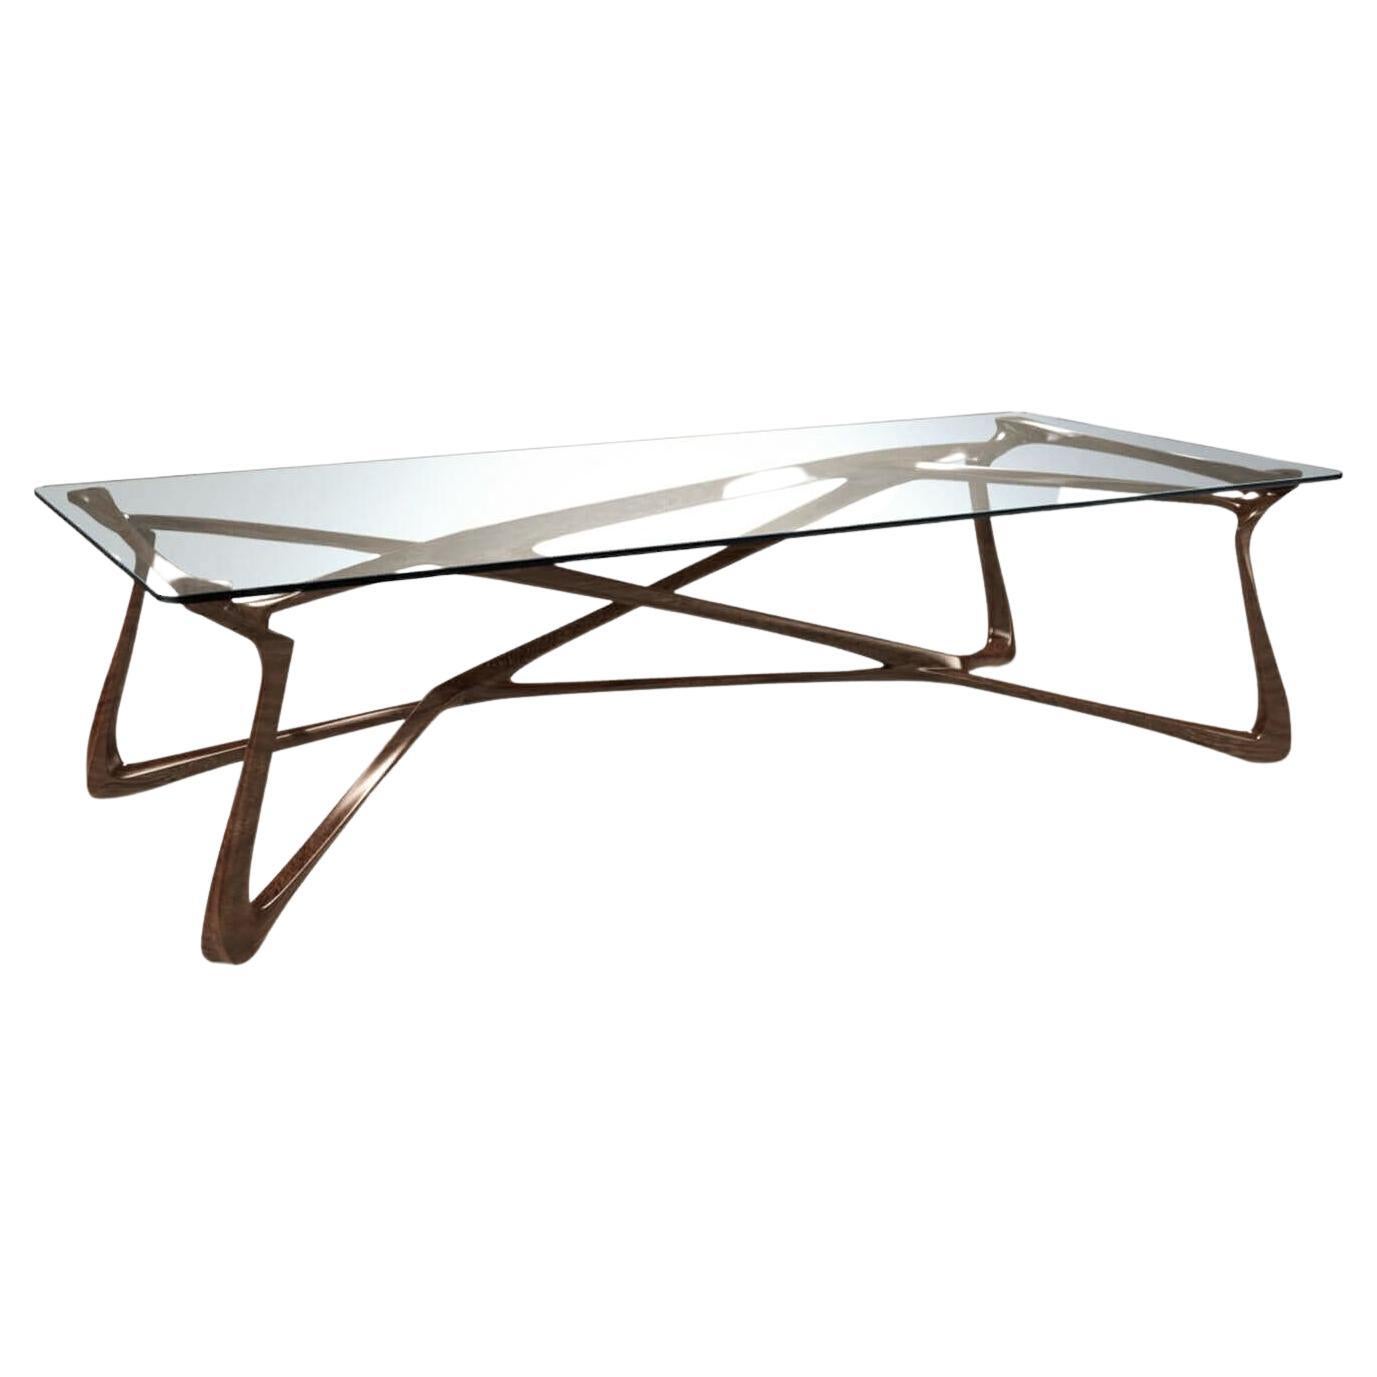 Thomas Newman Studio, "Howard Table", Dining Table For Sale